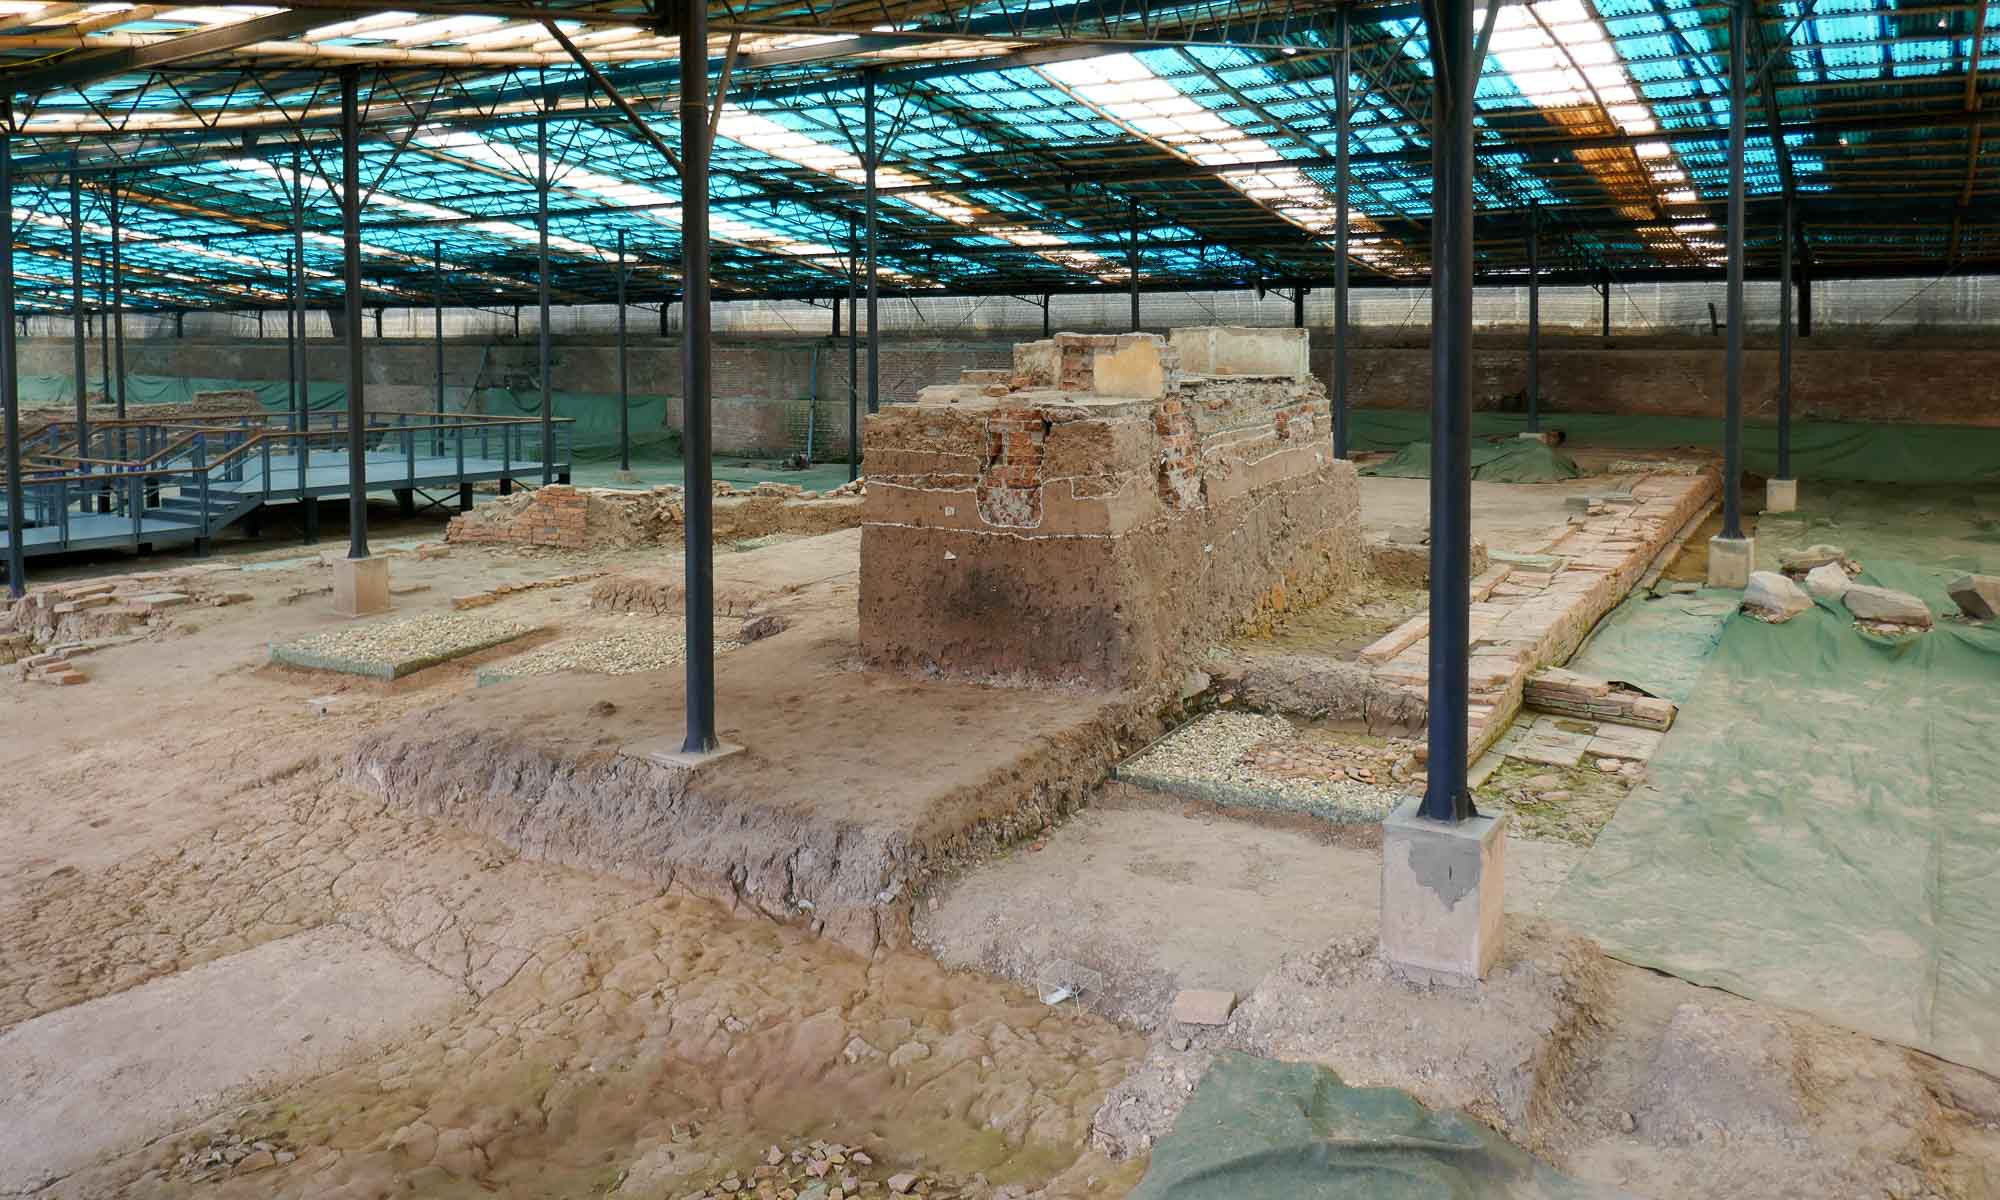 Part of the archaeological site